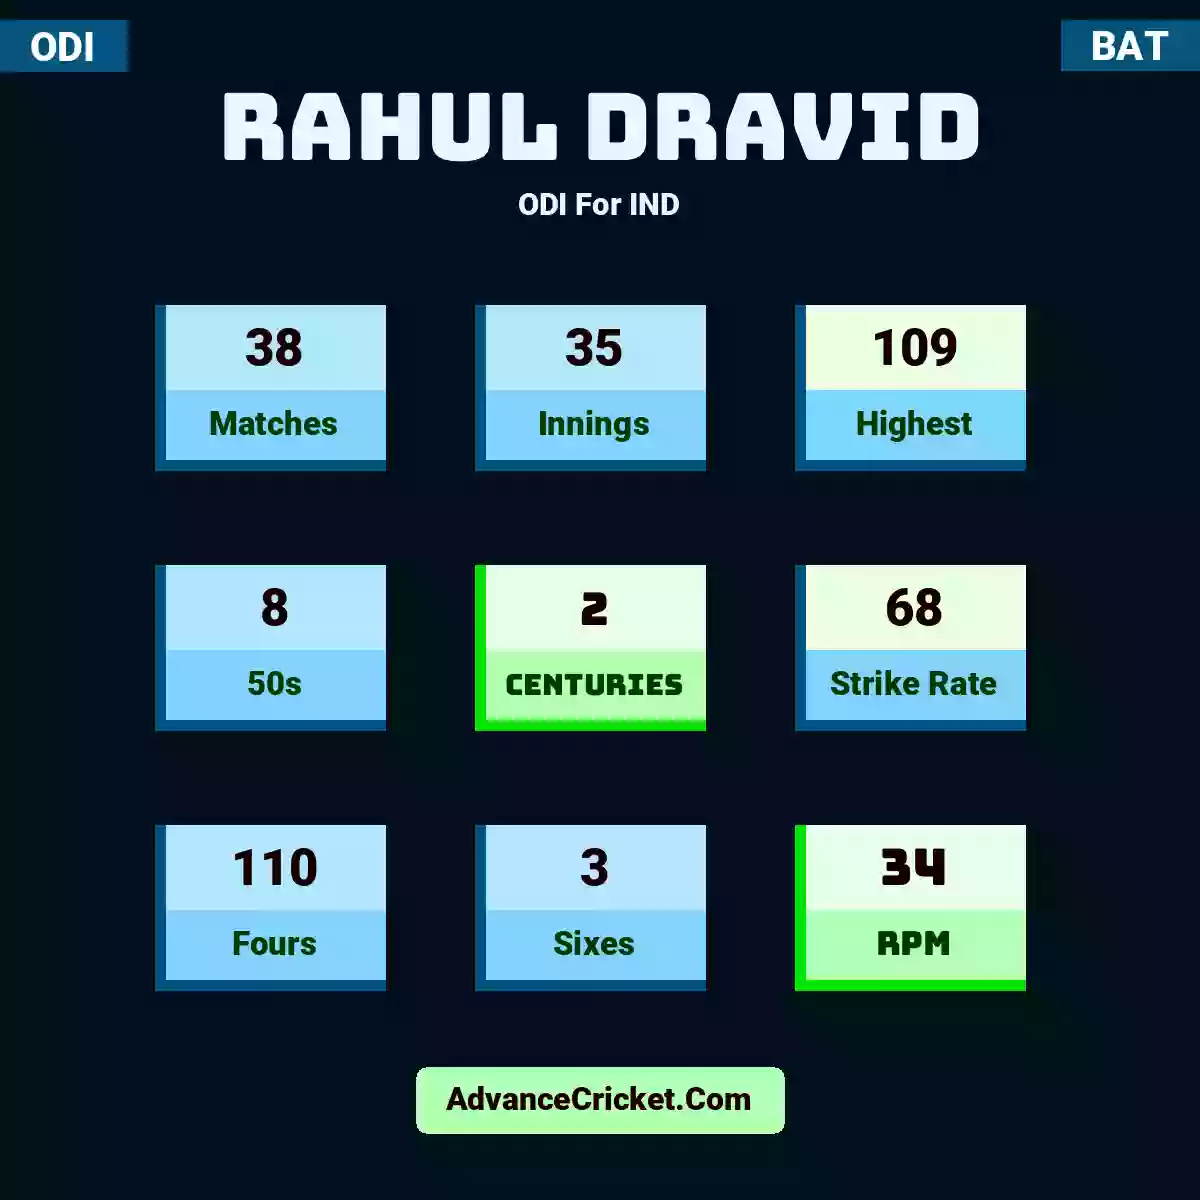 Rahul Dravid ODI  For IND, Rahul Dravid played 38 matches, scored 109 runs as highest, 8 half-centuries, and 2 centuries, with a strike rate of 68. R.Dravid hit 110 fours and 3 sixes, with an RPM of 34.